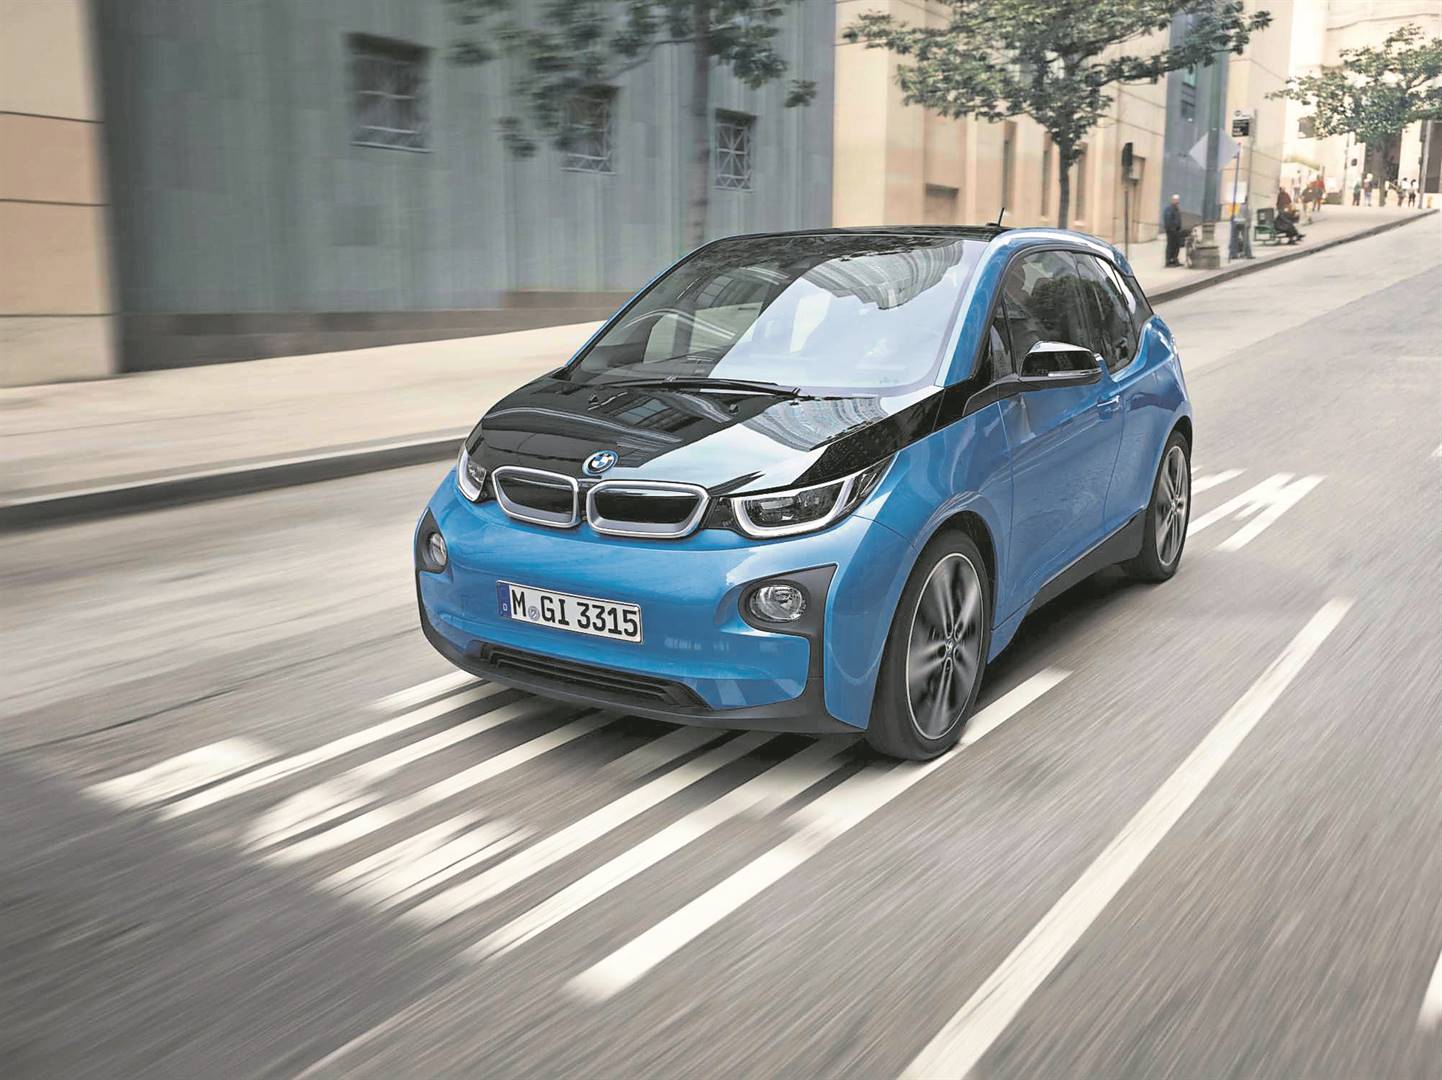 BMW i3 is an affordable EV car that buyers can go for.